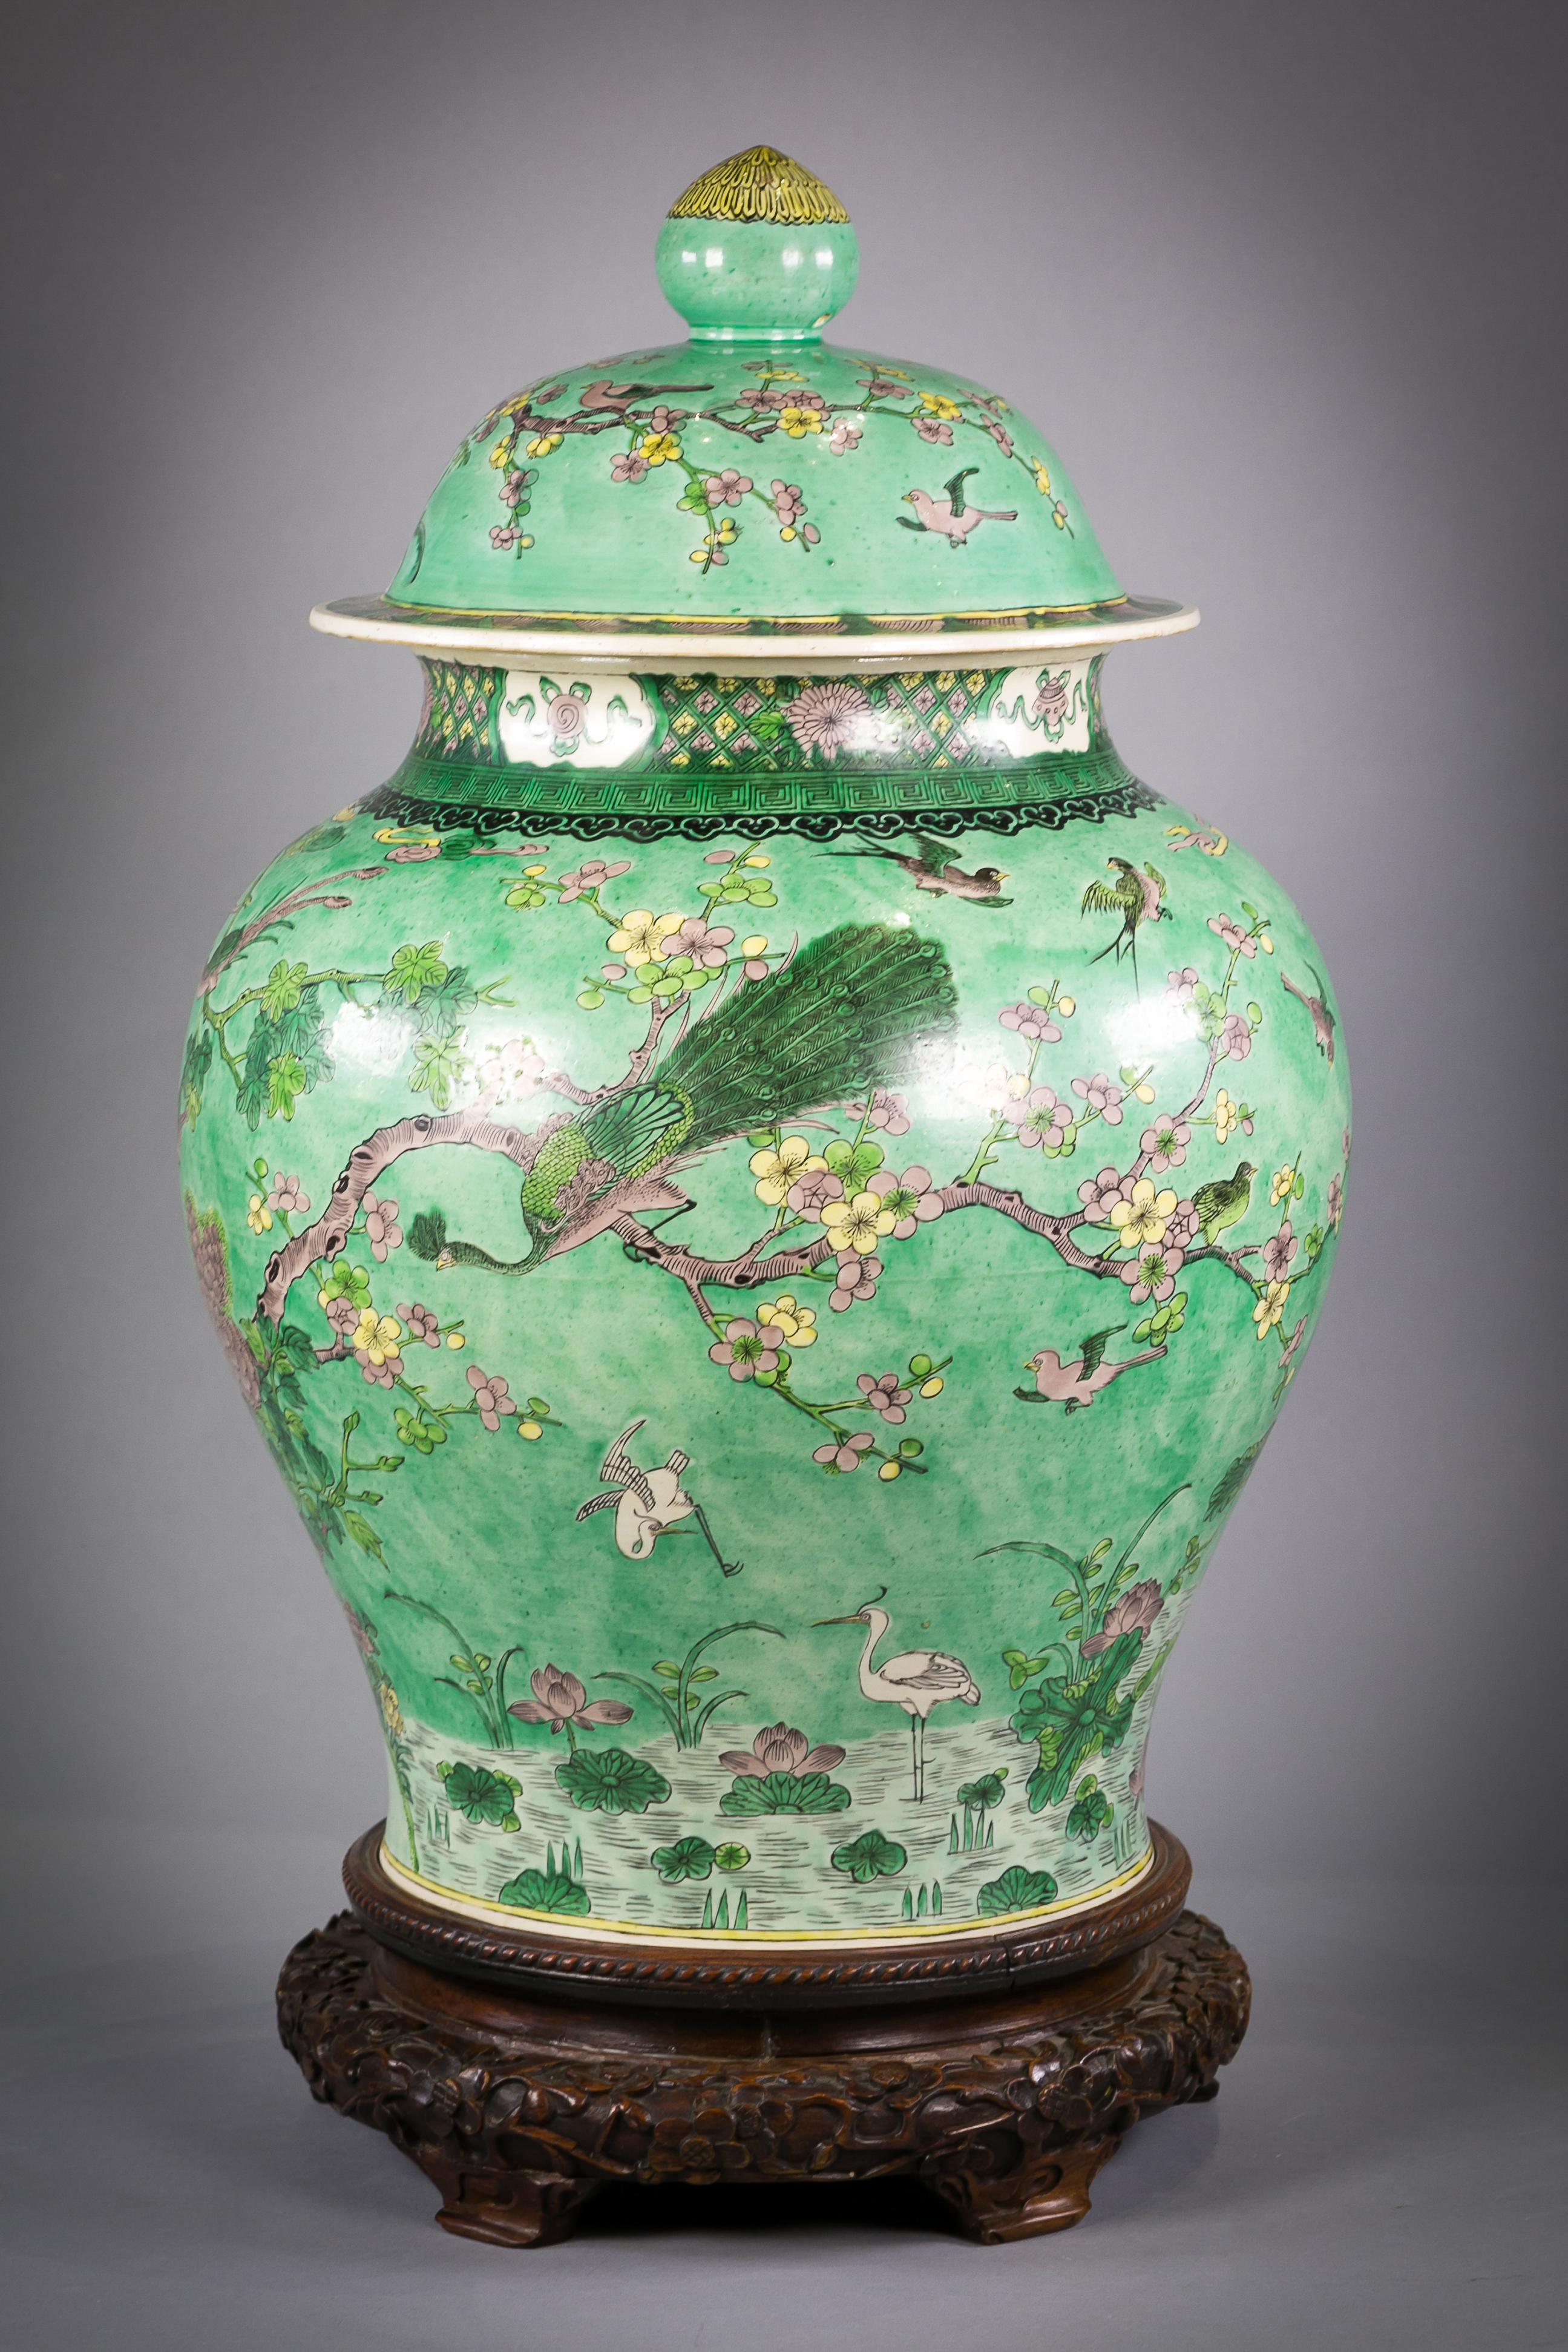 Mid-19th Century One Large Chinese Porcelain Famille Verte Covered Vase on Stand, circa 1860